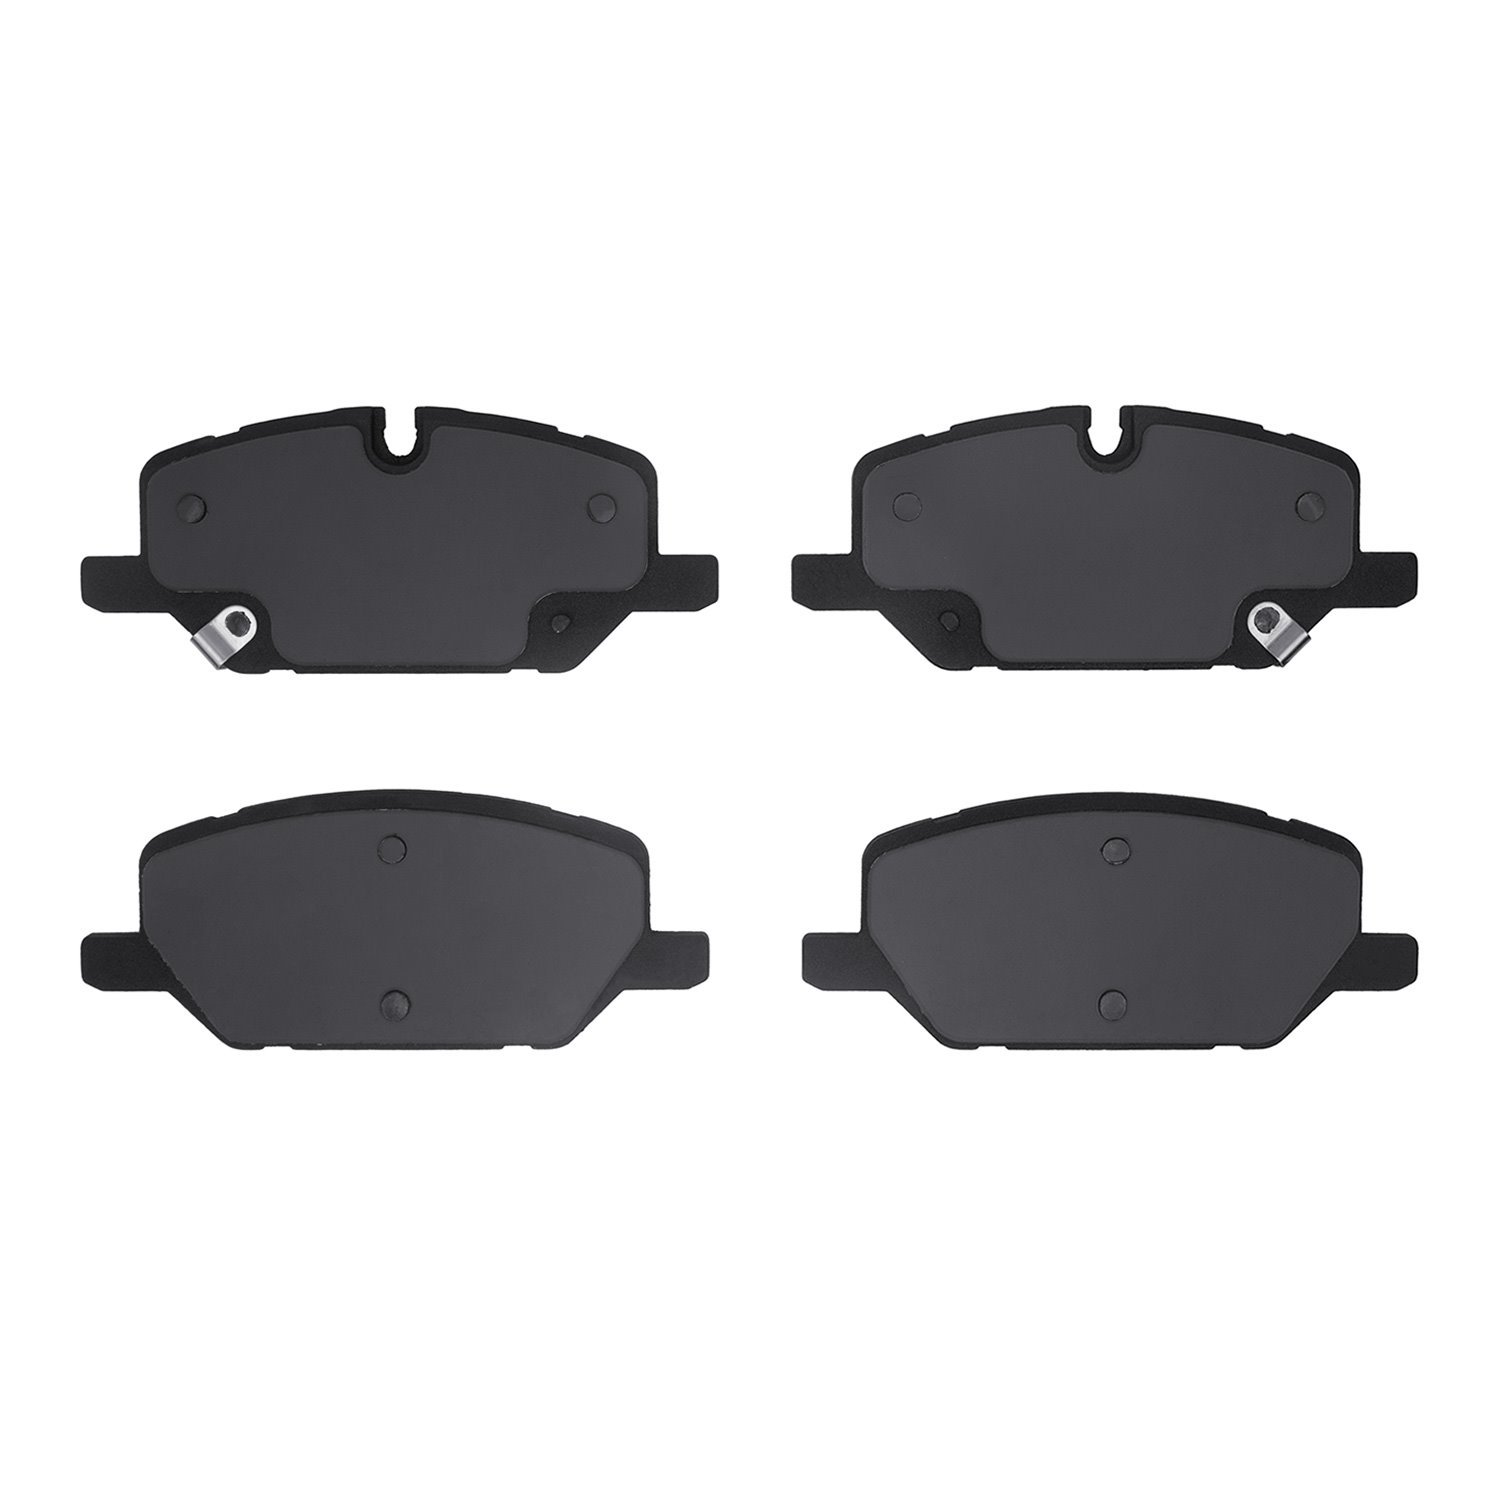 1551-2314-00 5000 Advanced Ceramic Brake Pads, Fits Select GM, Position: Front